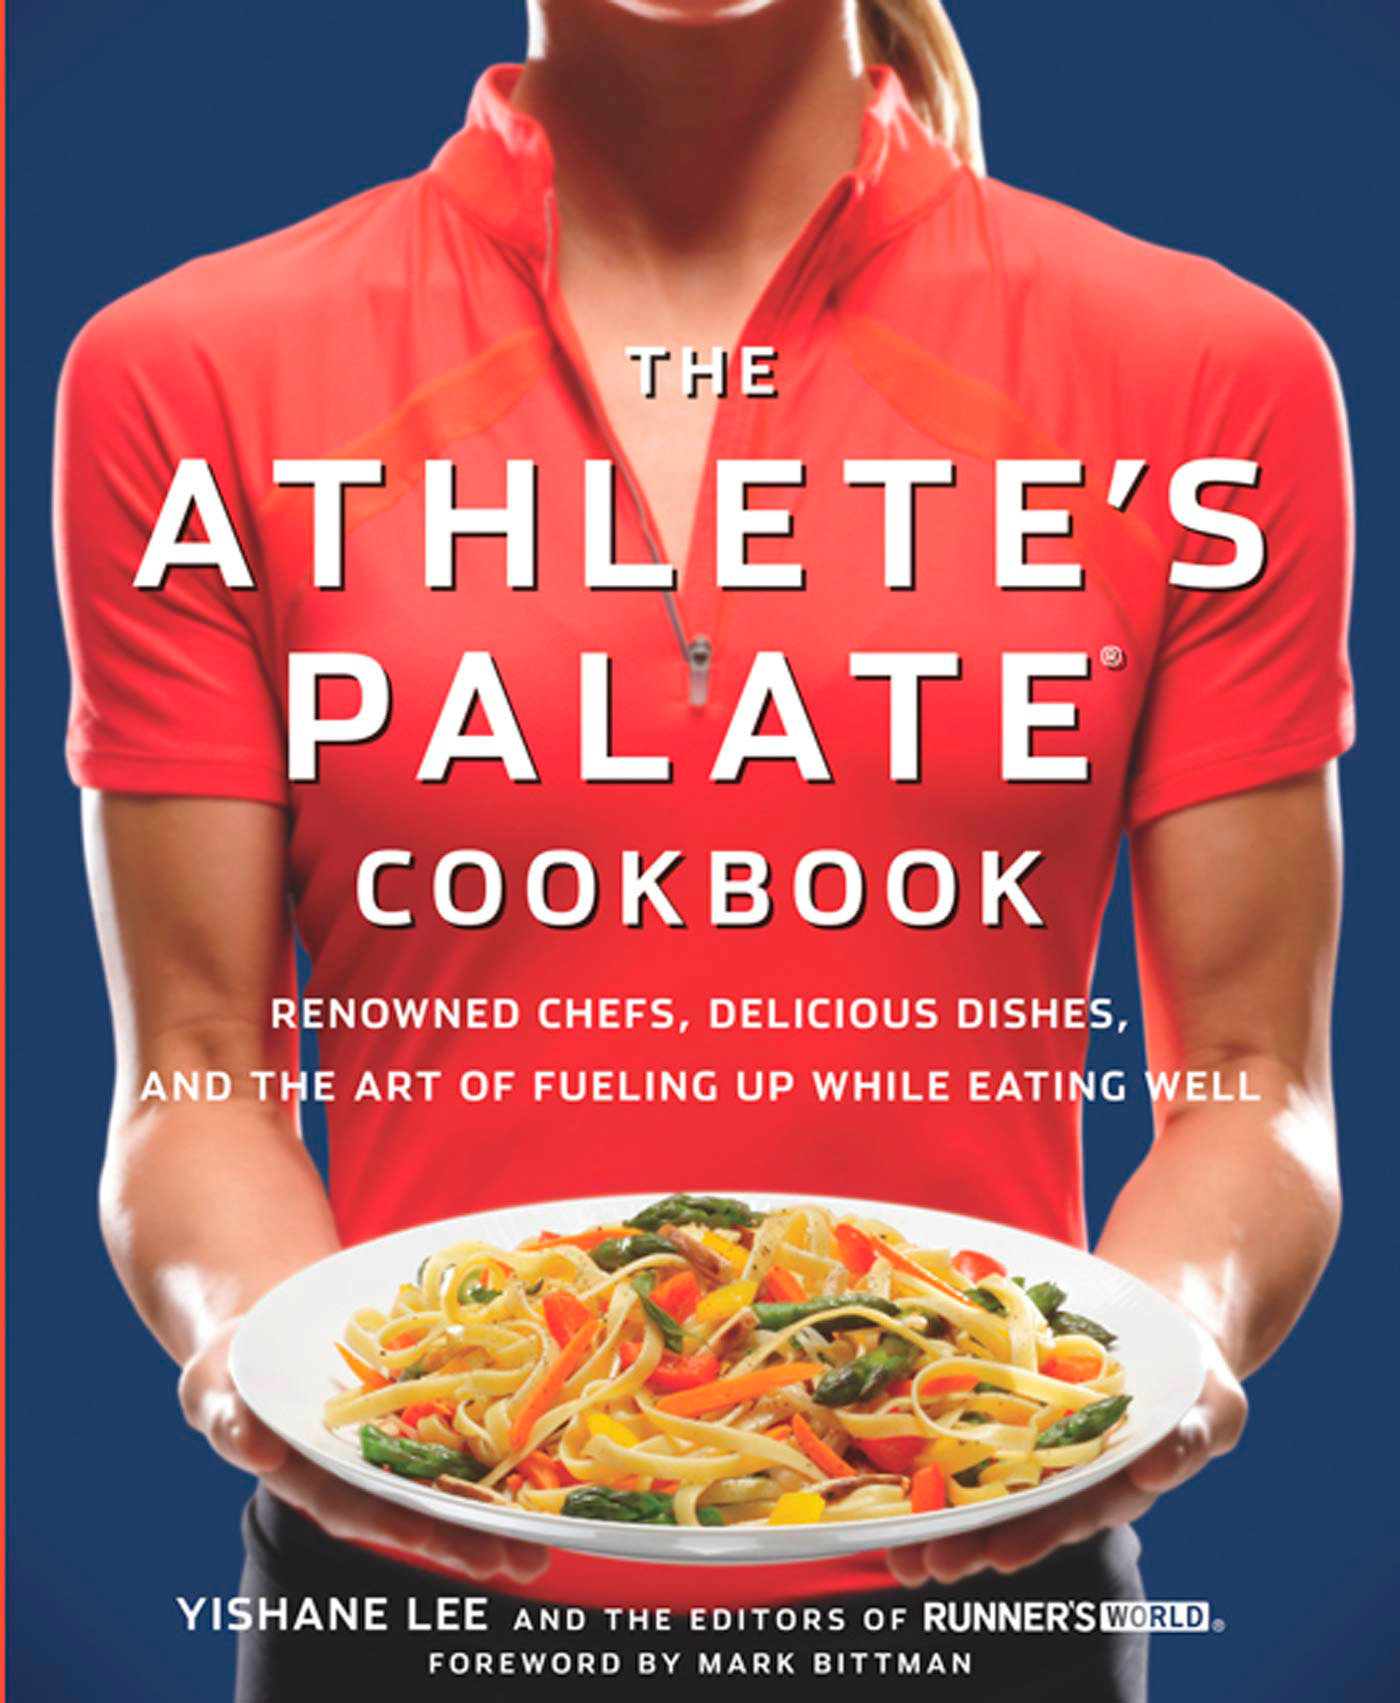 The Athlete's Palate Cookbook : Renowned Chefs, Delicious Dishes, and the Art of Fueling Up While Eating Well - image 1 of 1